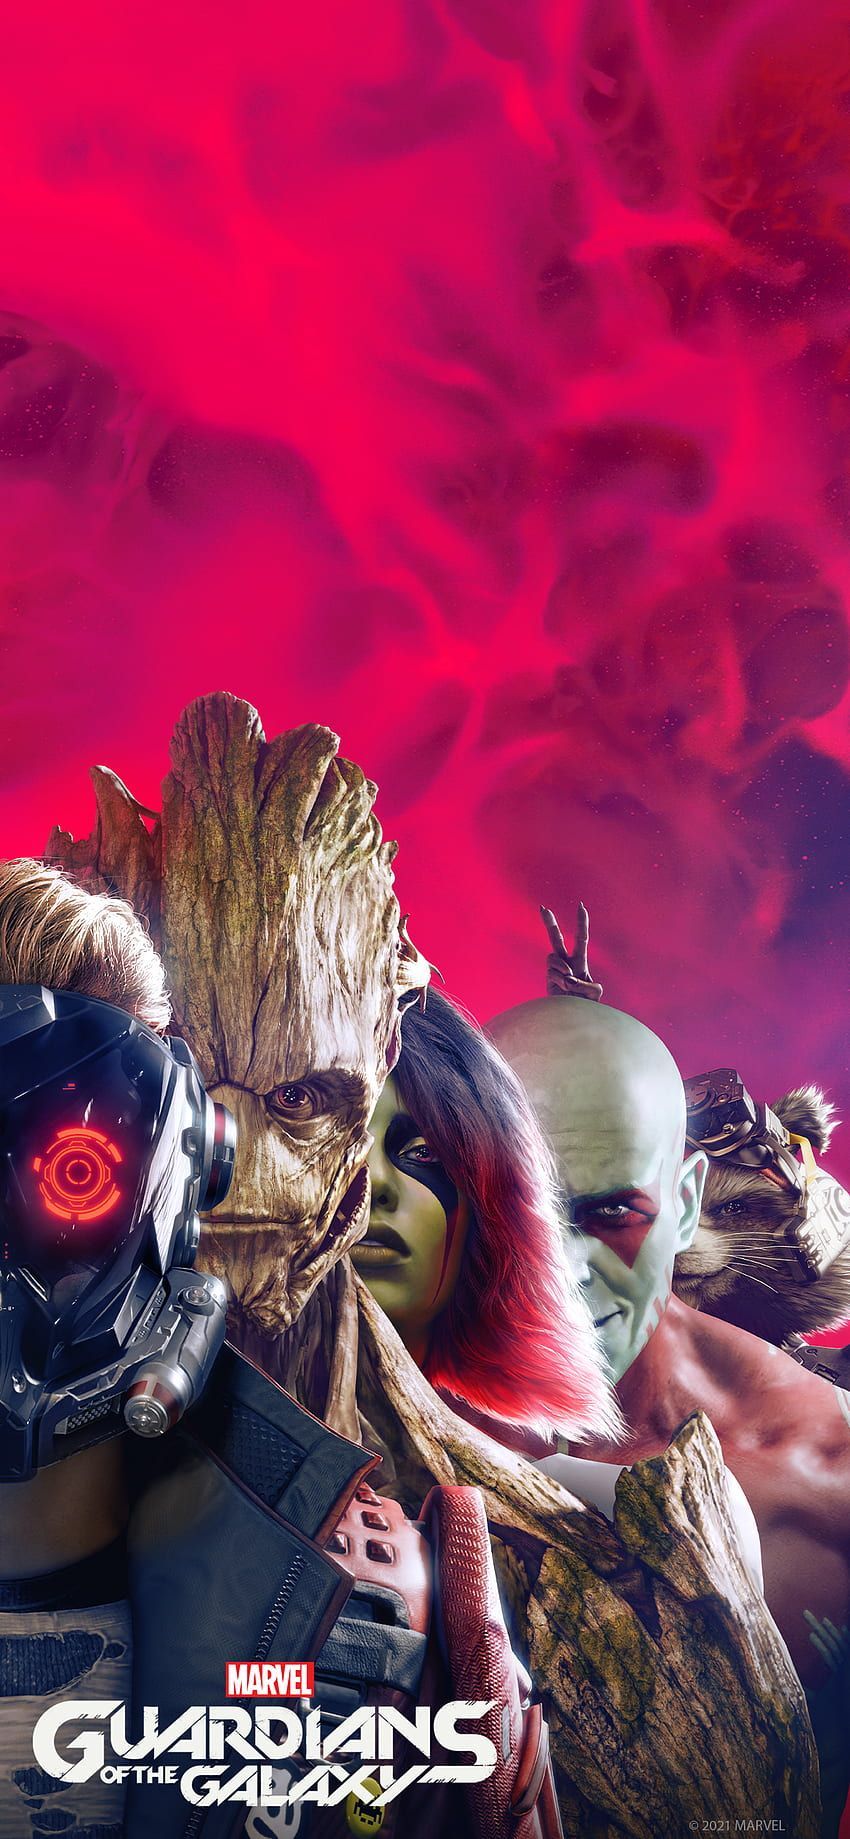 Guardians of the galaxy vol. 2 poster iPhone wallpaper - Guardians of the Galaxy